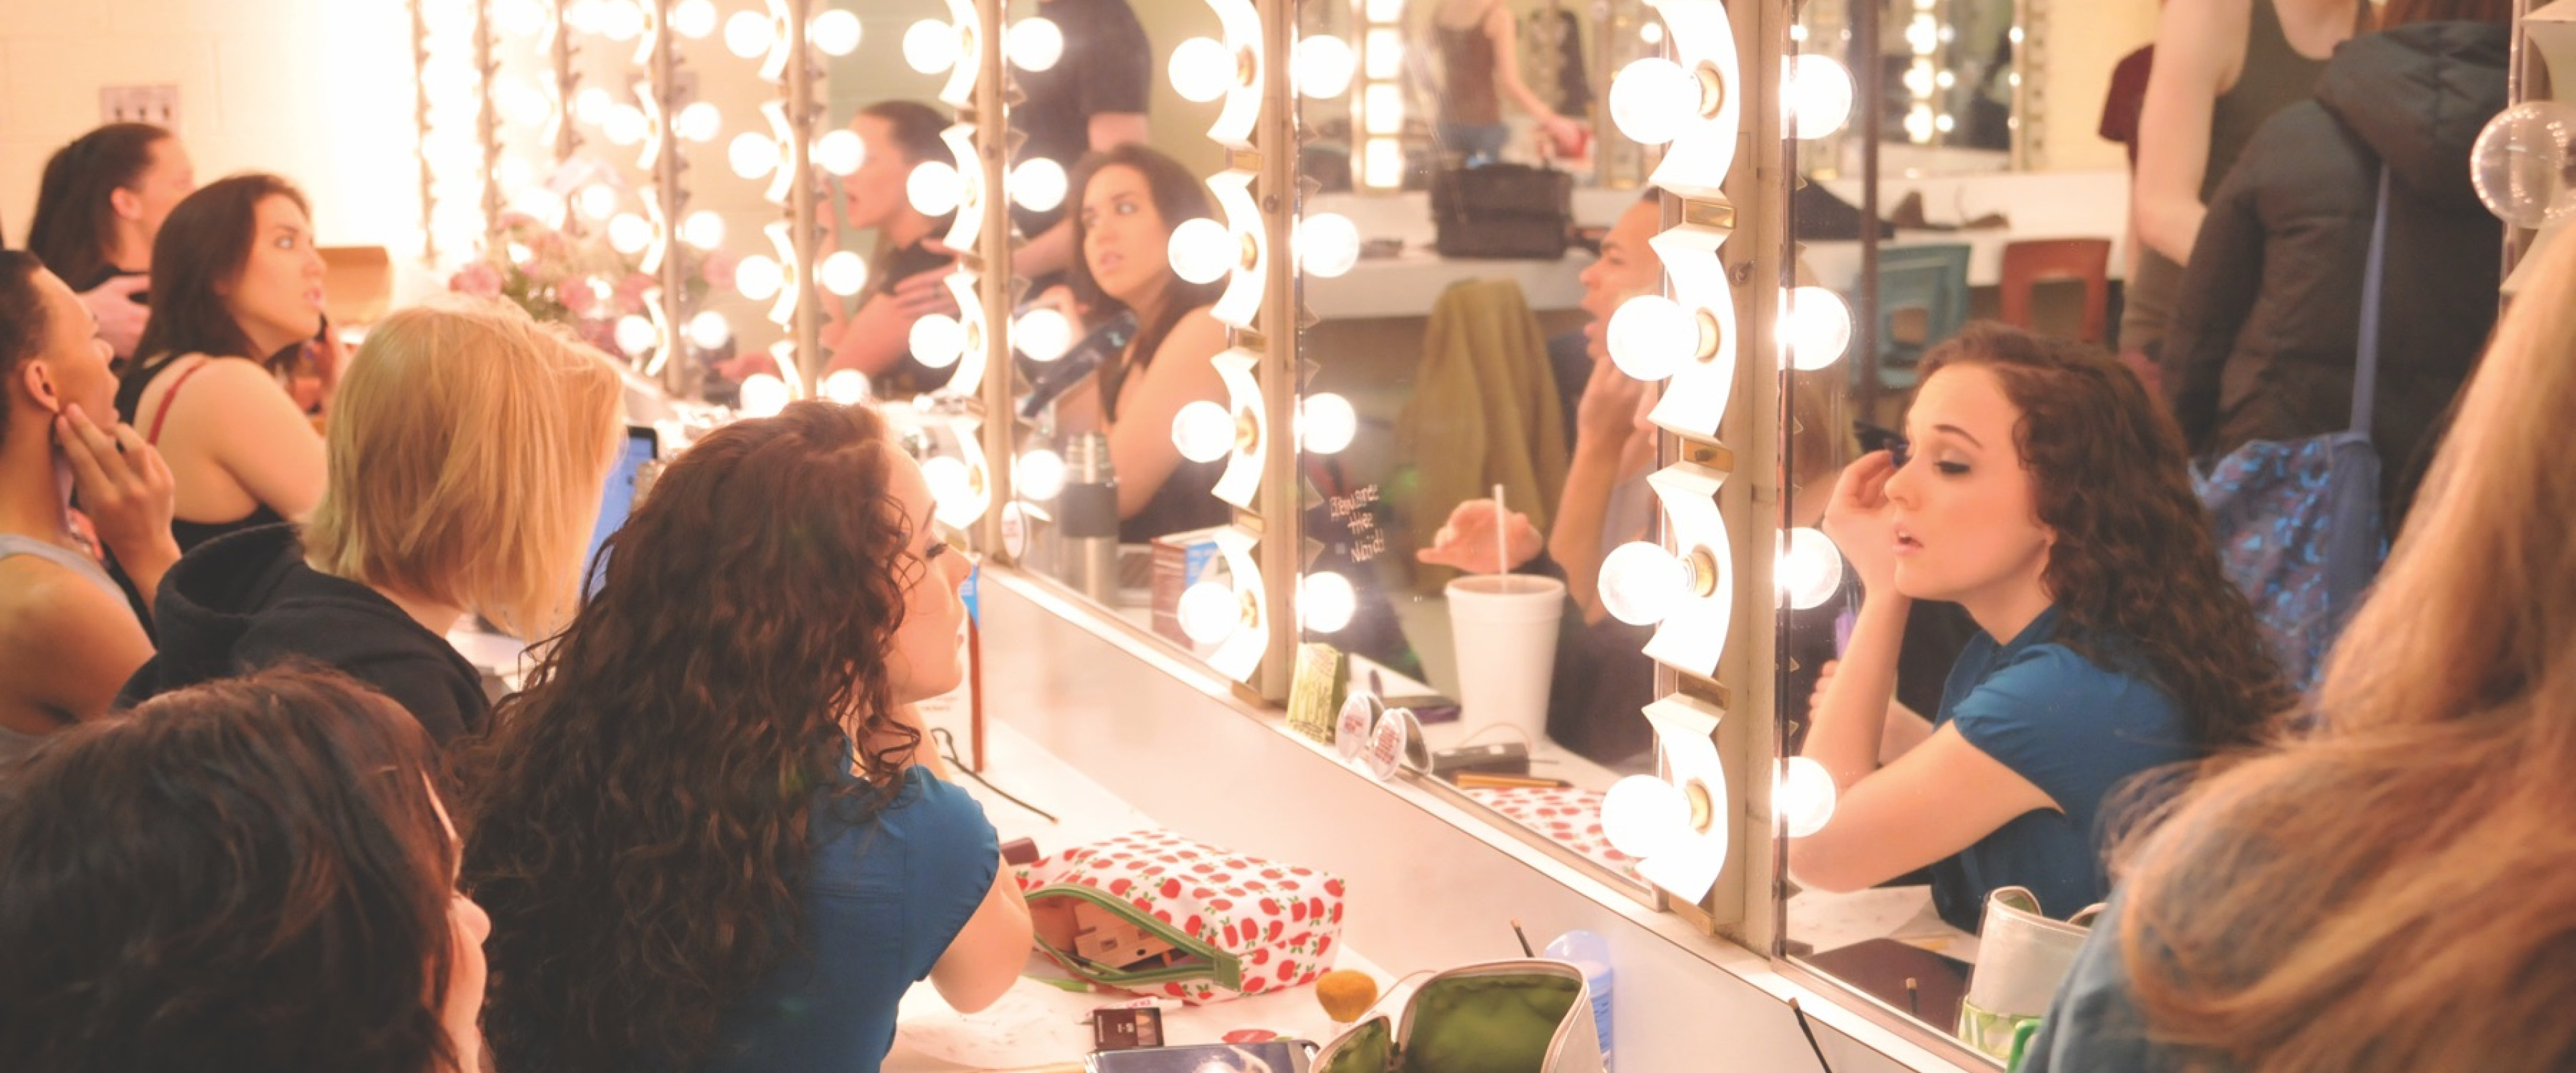 Students getting ready in the dressing room with the focus on a woman putting on mascara in front of the lighted mirrors.